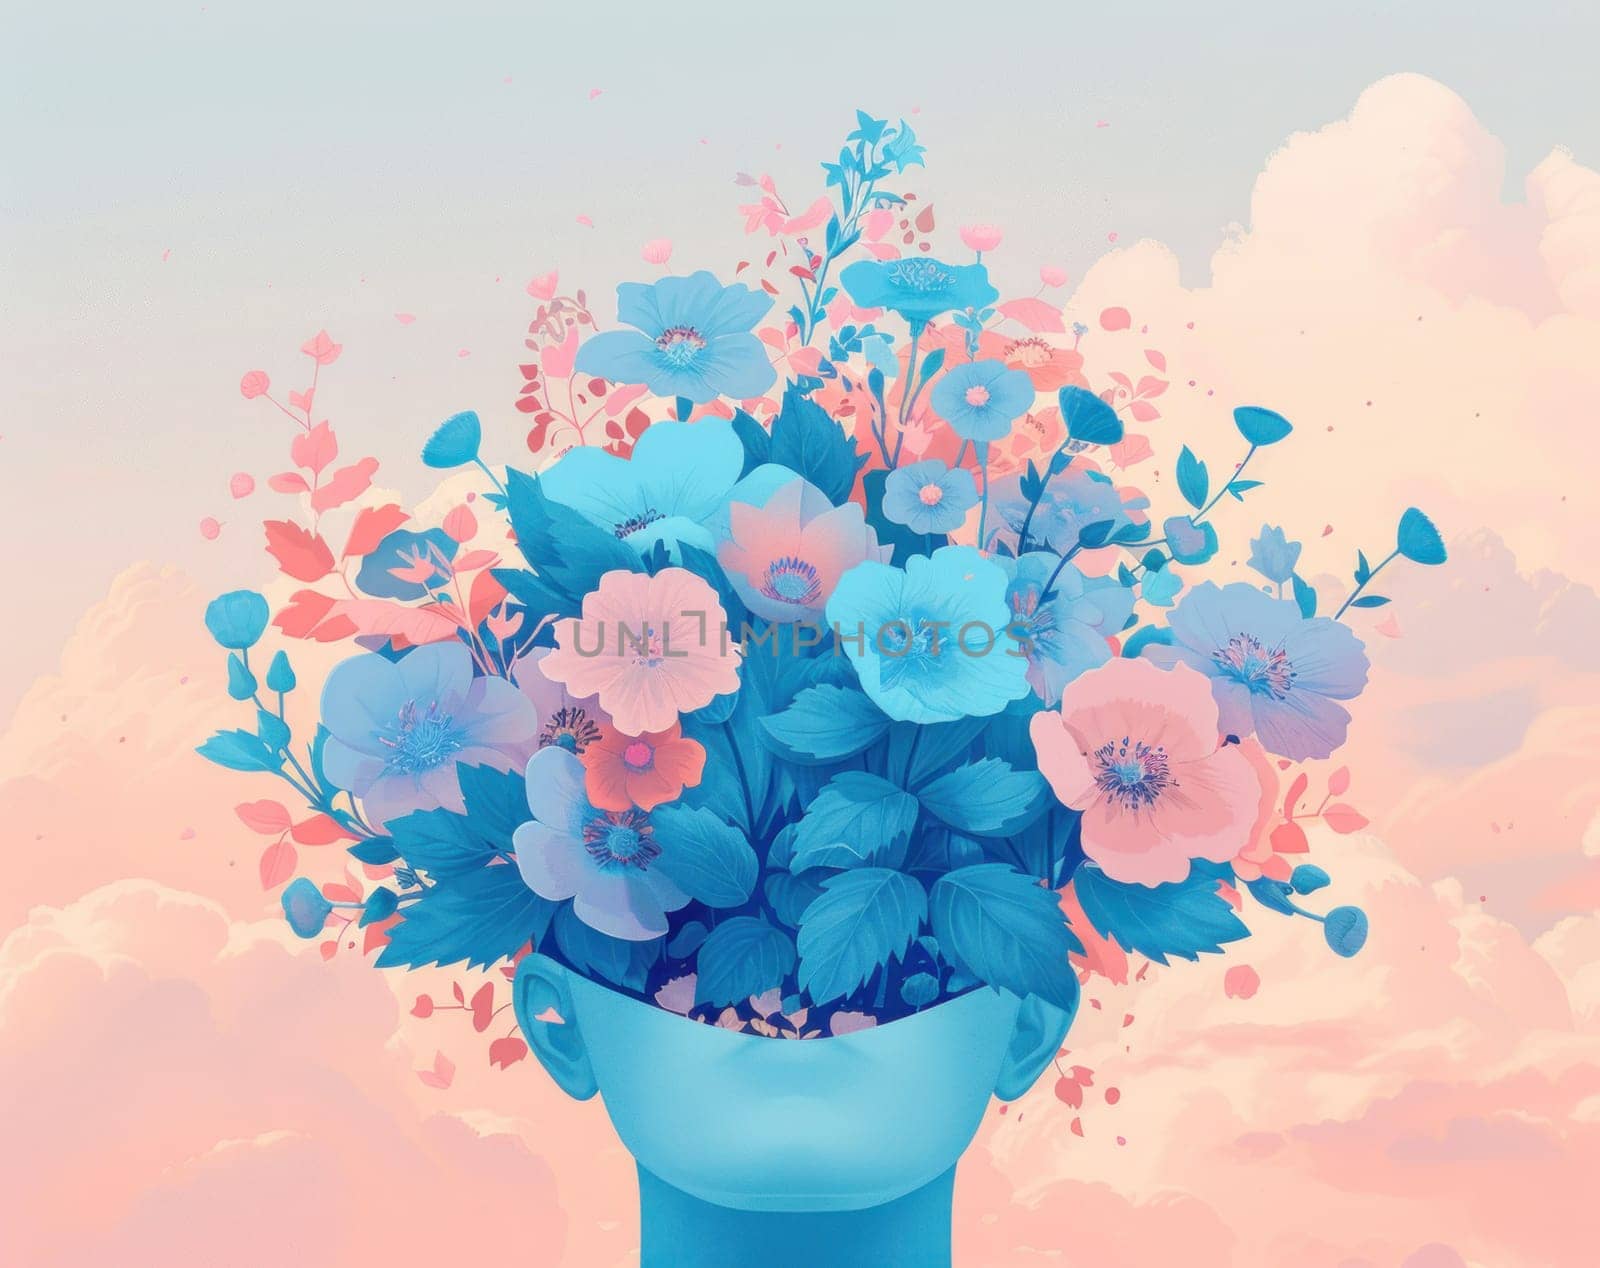 Floral fantasy woman's head filled with blue and pink flowers in the shape of a flower by Vichizh